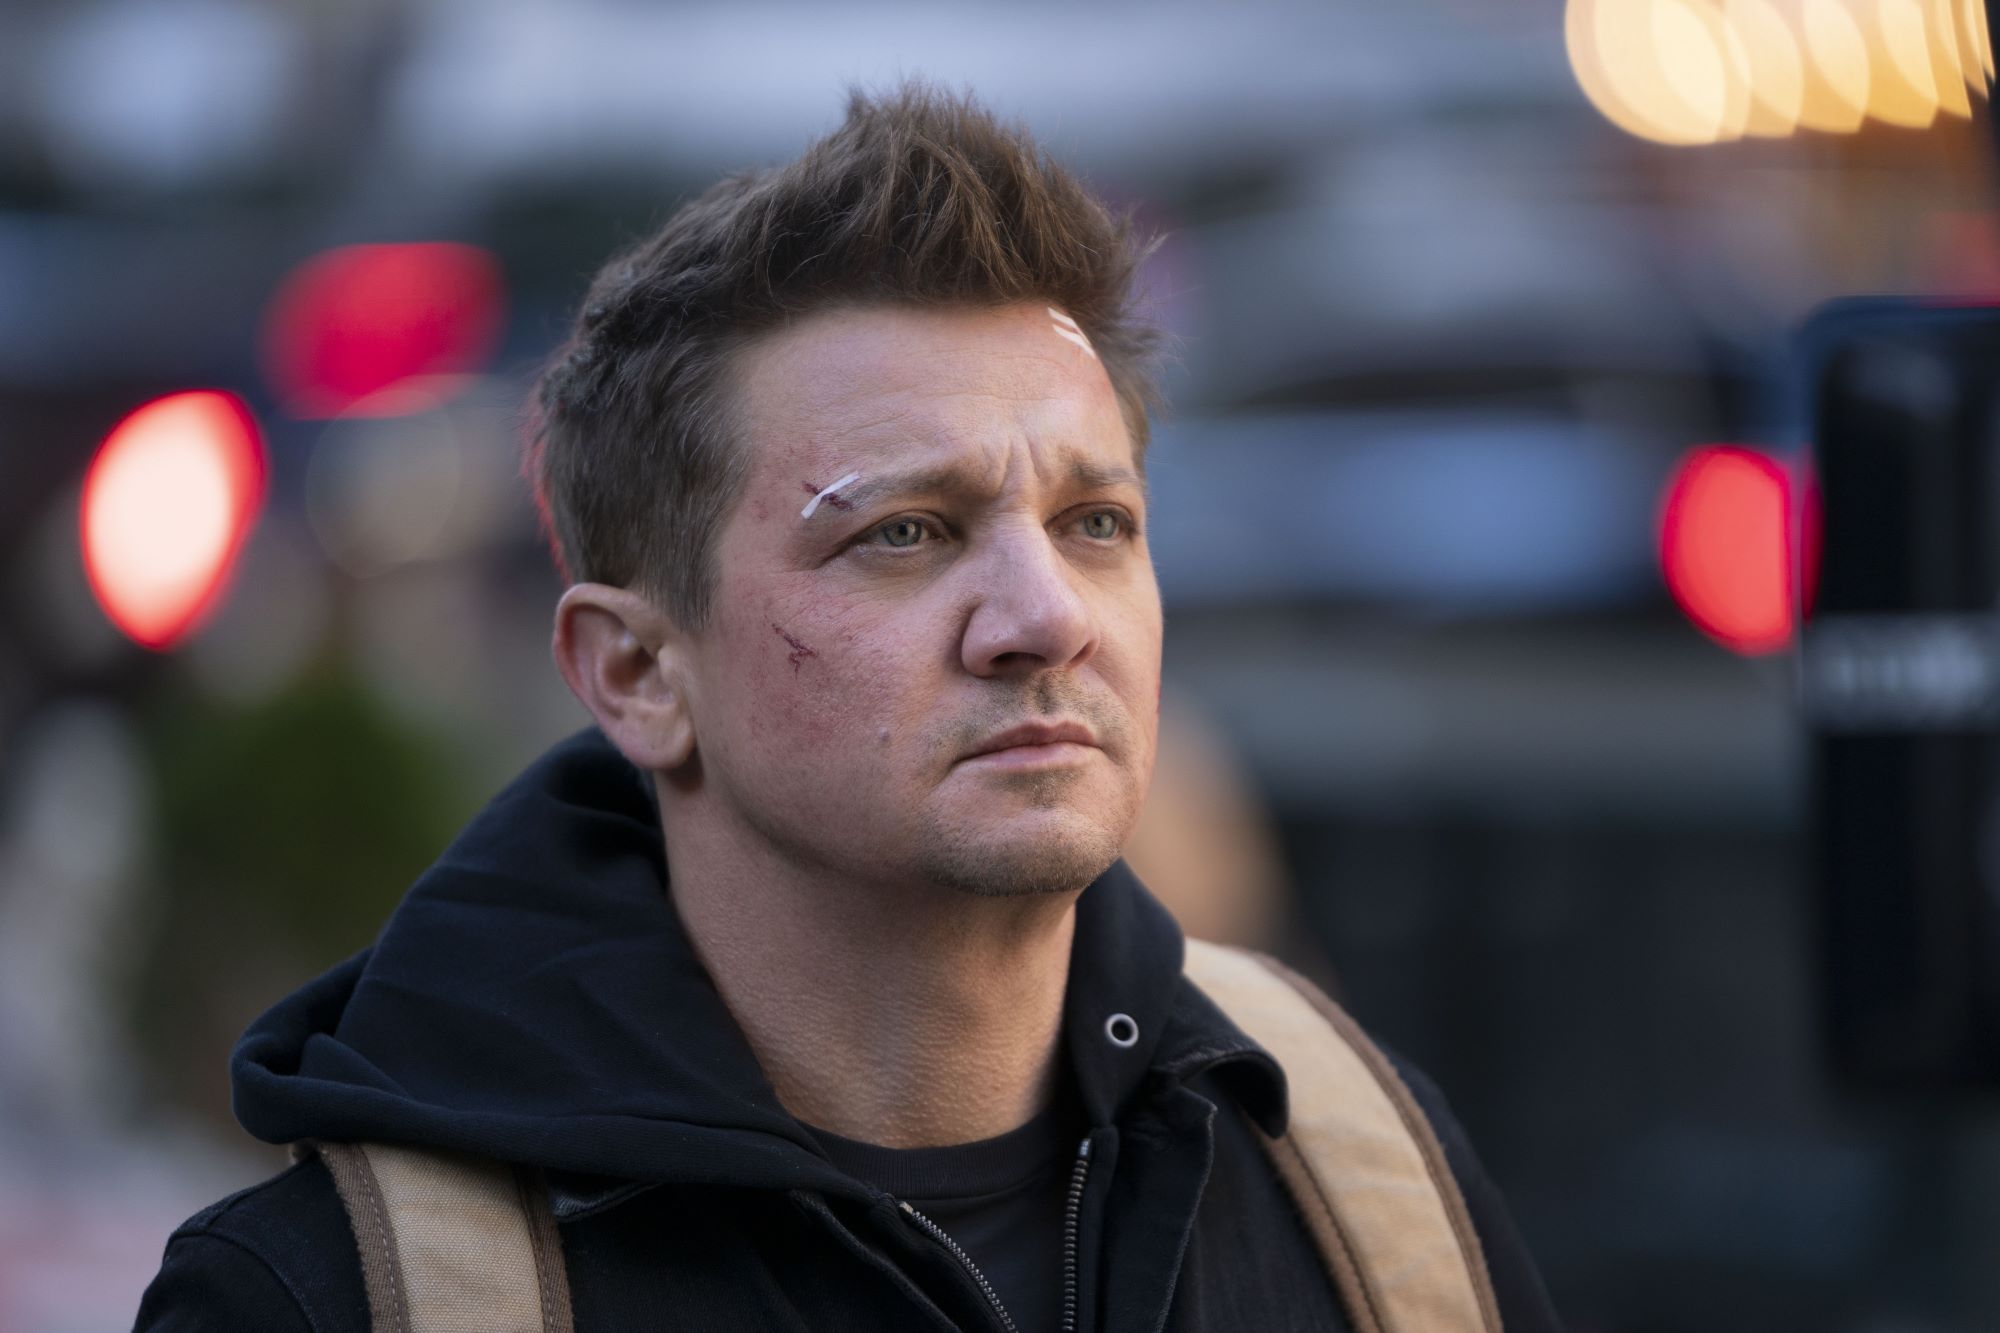 Jeremy Renner as Clint Barton with cuts on his face in a scene from 'Hawkeye'